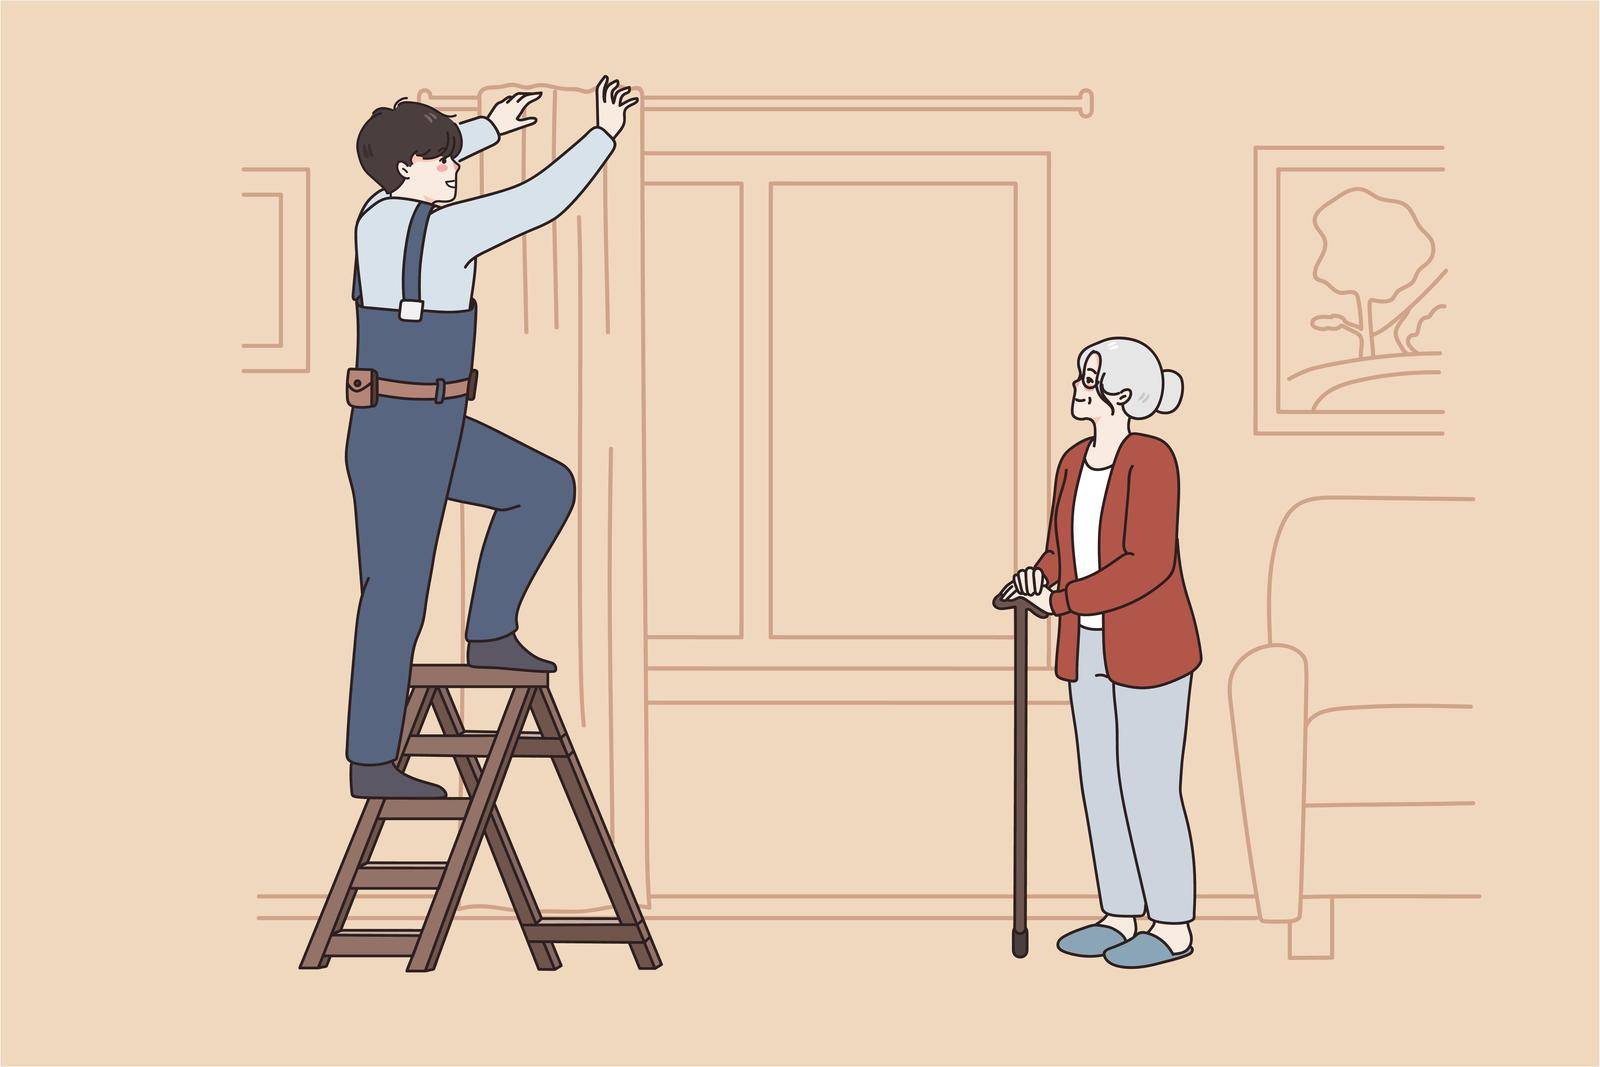 Repairing works and help concept. Young man worker repairman putting curtains to window helping elderly woman in her apartment vector illustration